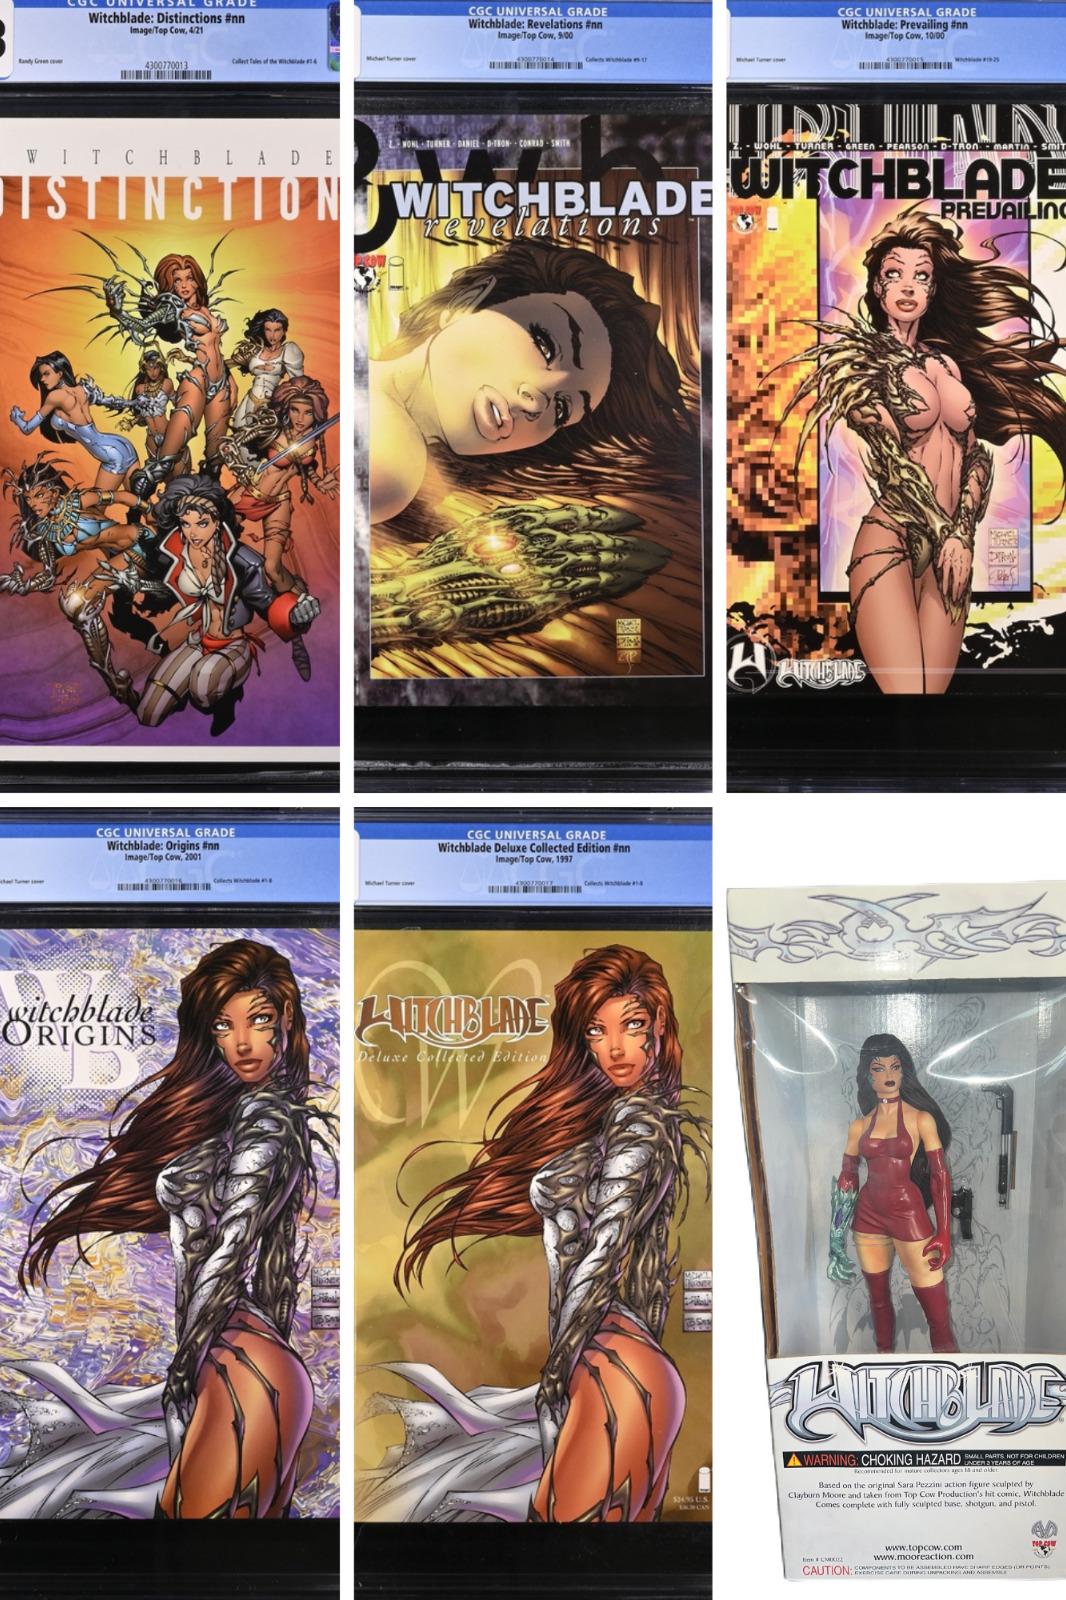 Witchblade Prevailing Deluxe Collected Edition Origins Revelations Distinctions